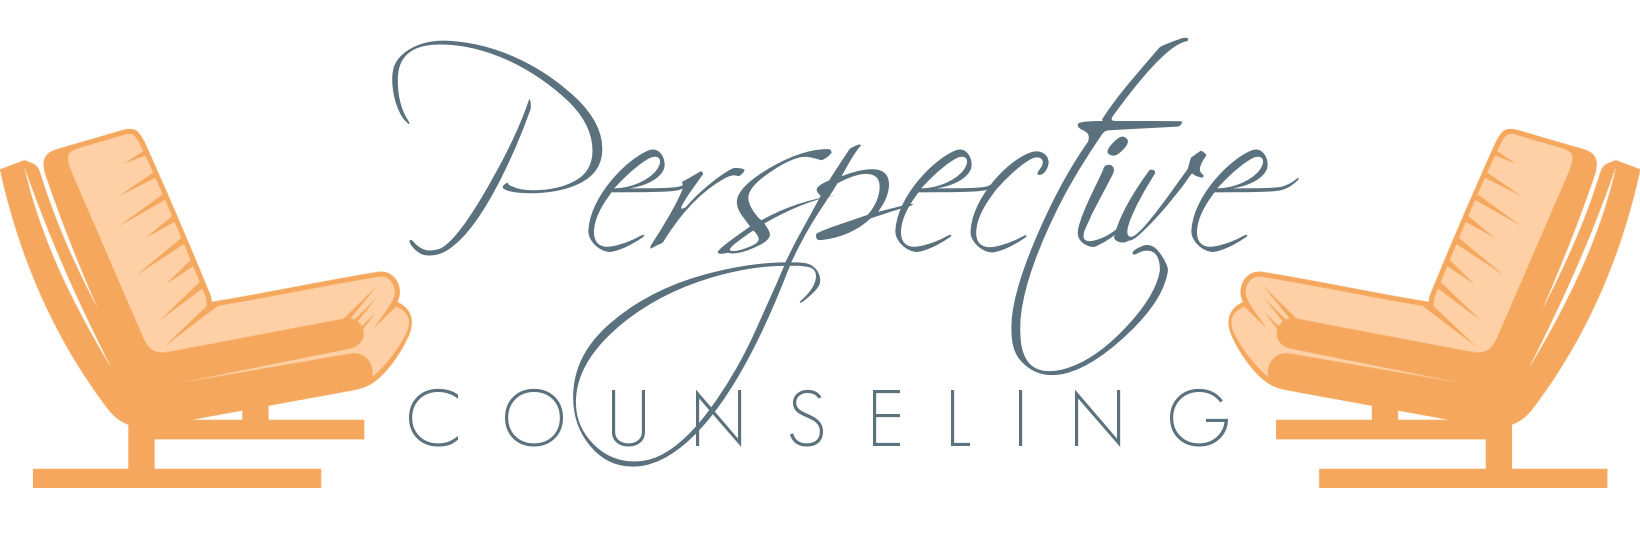 Perspecitve Counseling logo